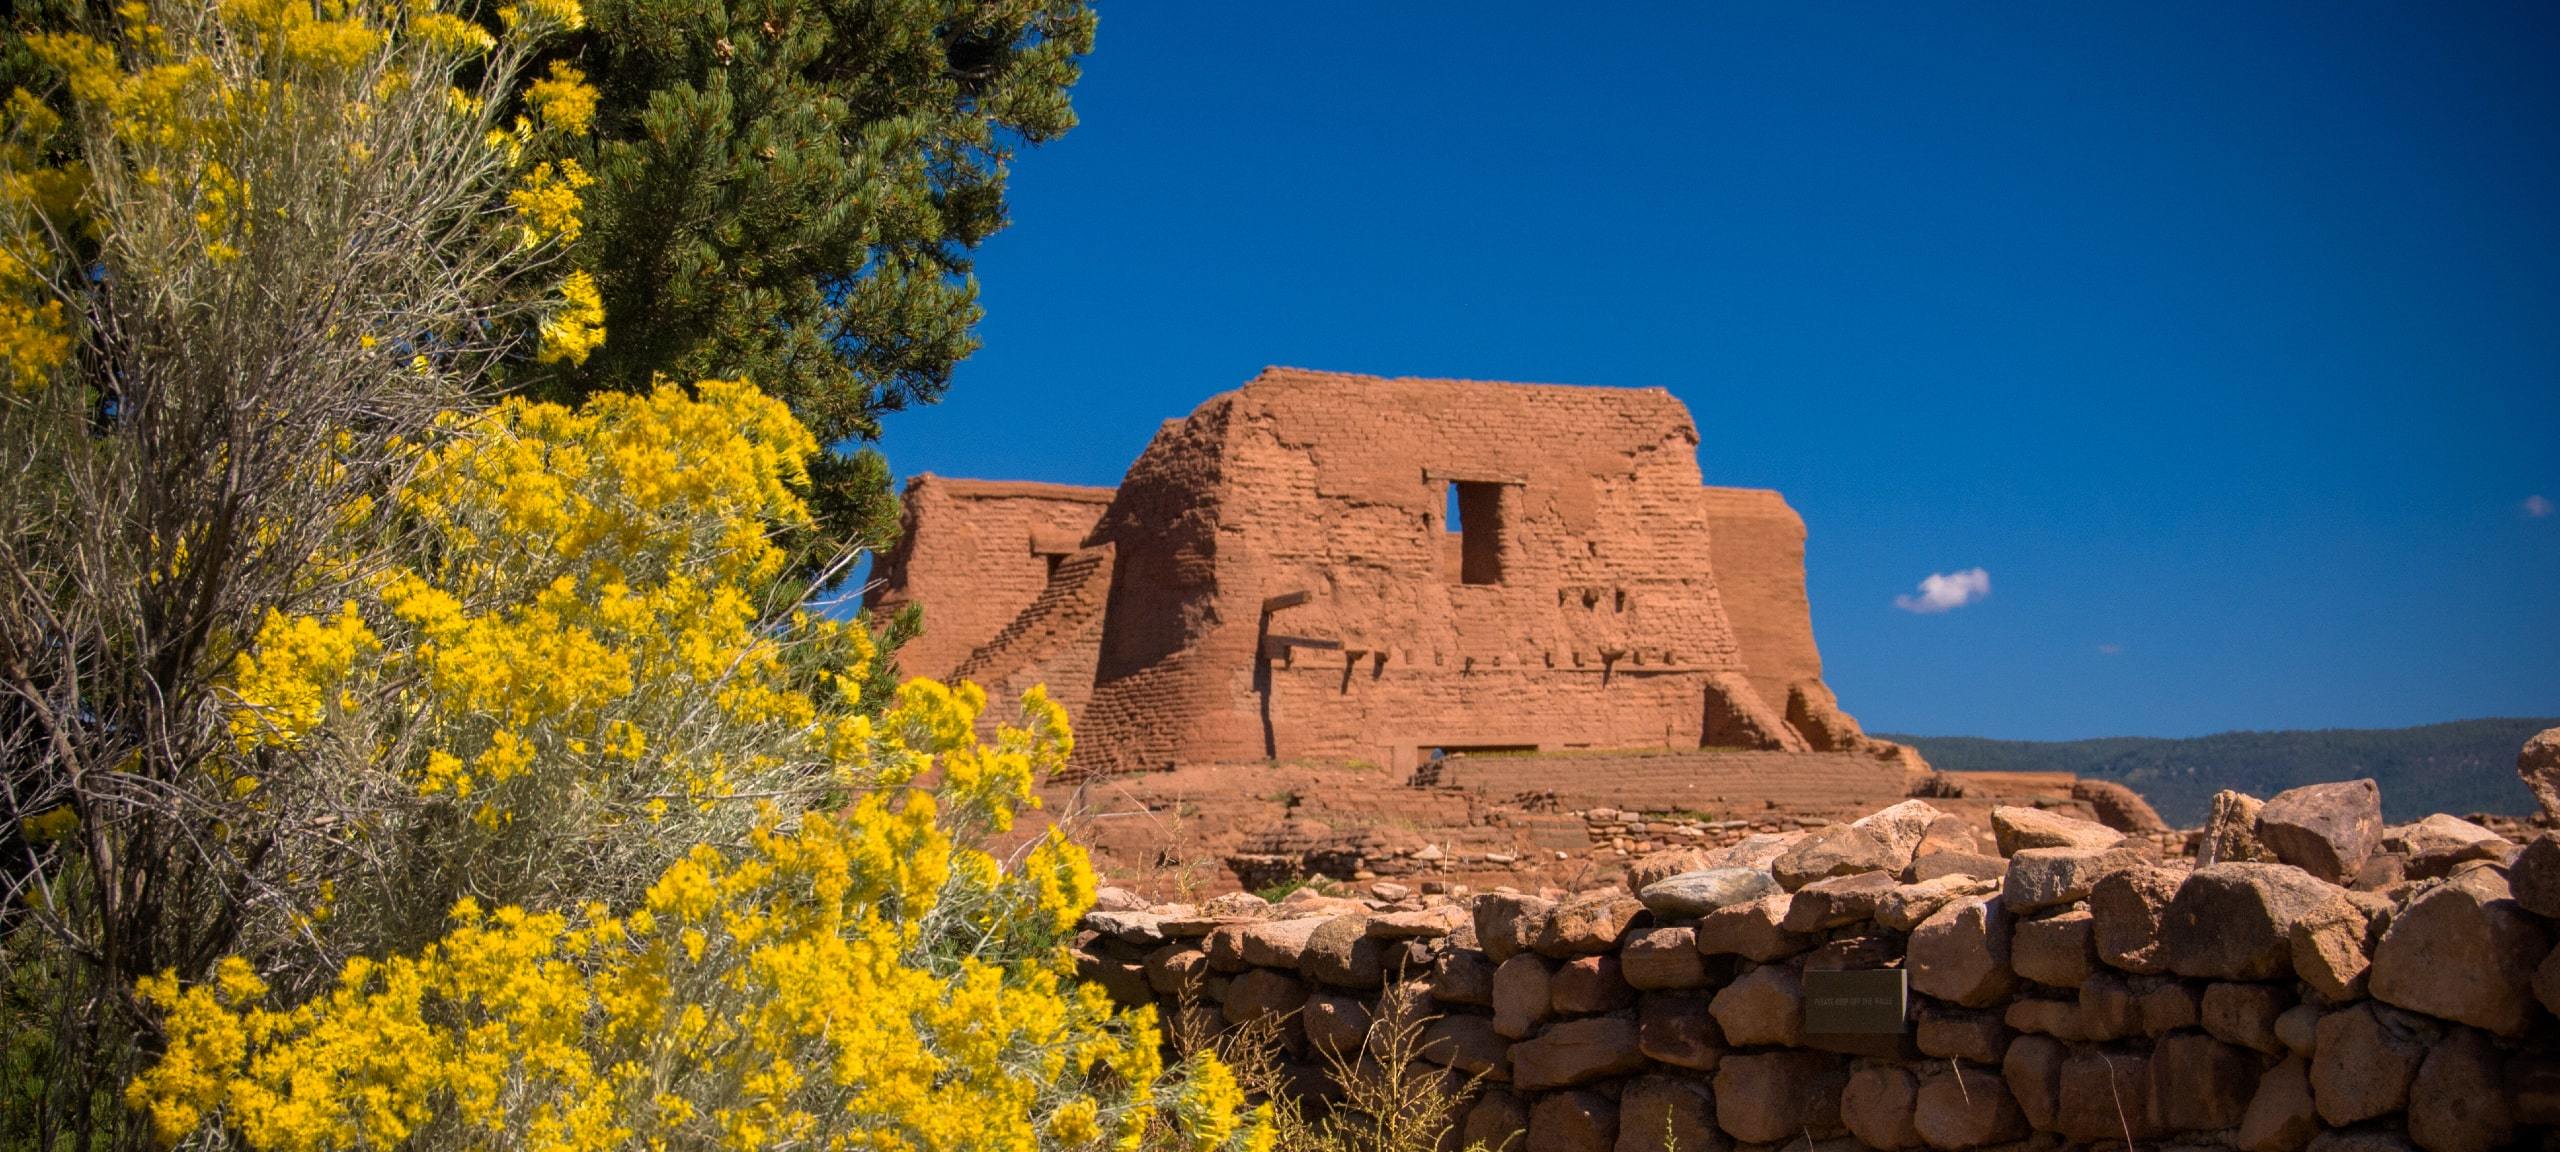 Flowers and ruins at Pecos National Historical Park, Pecos